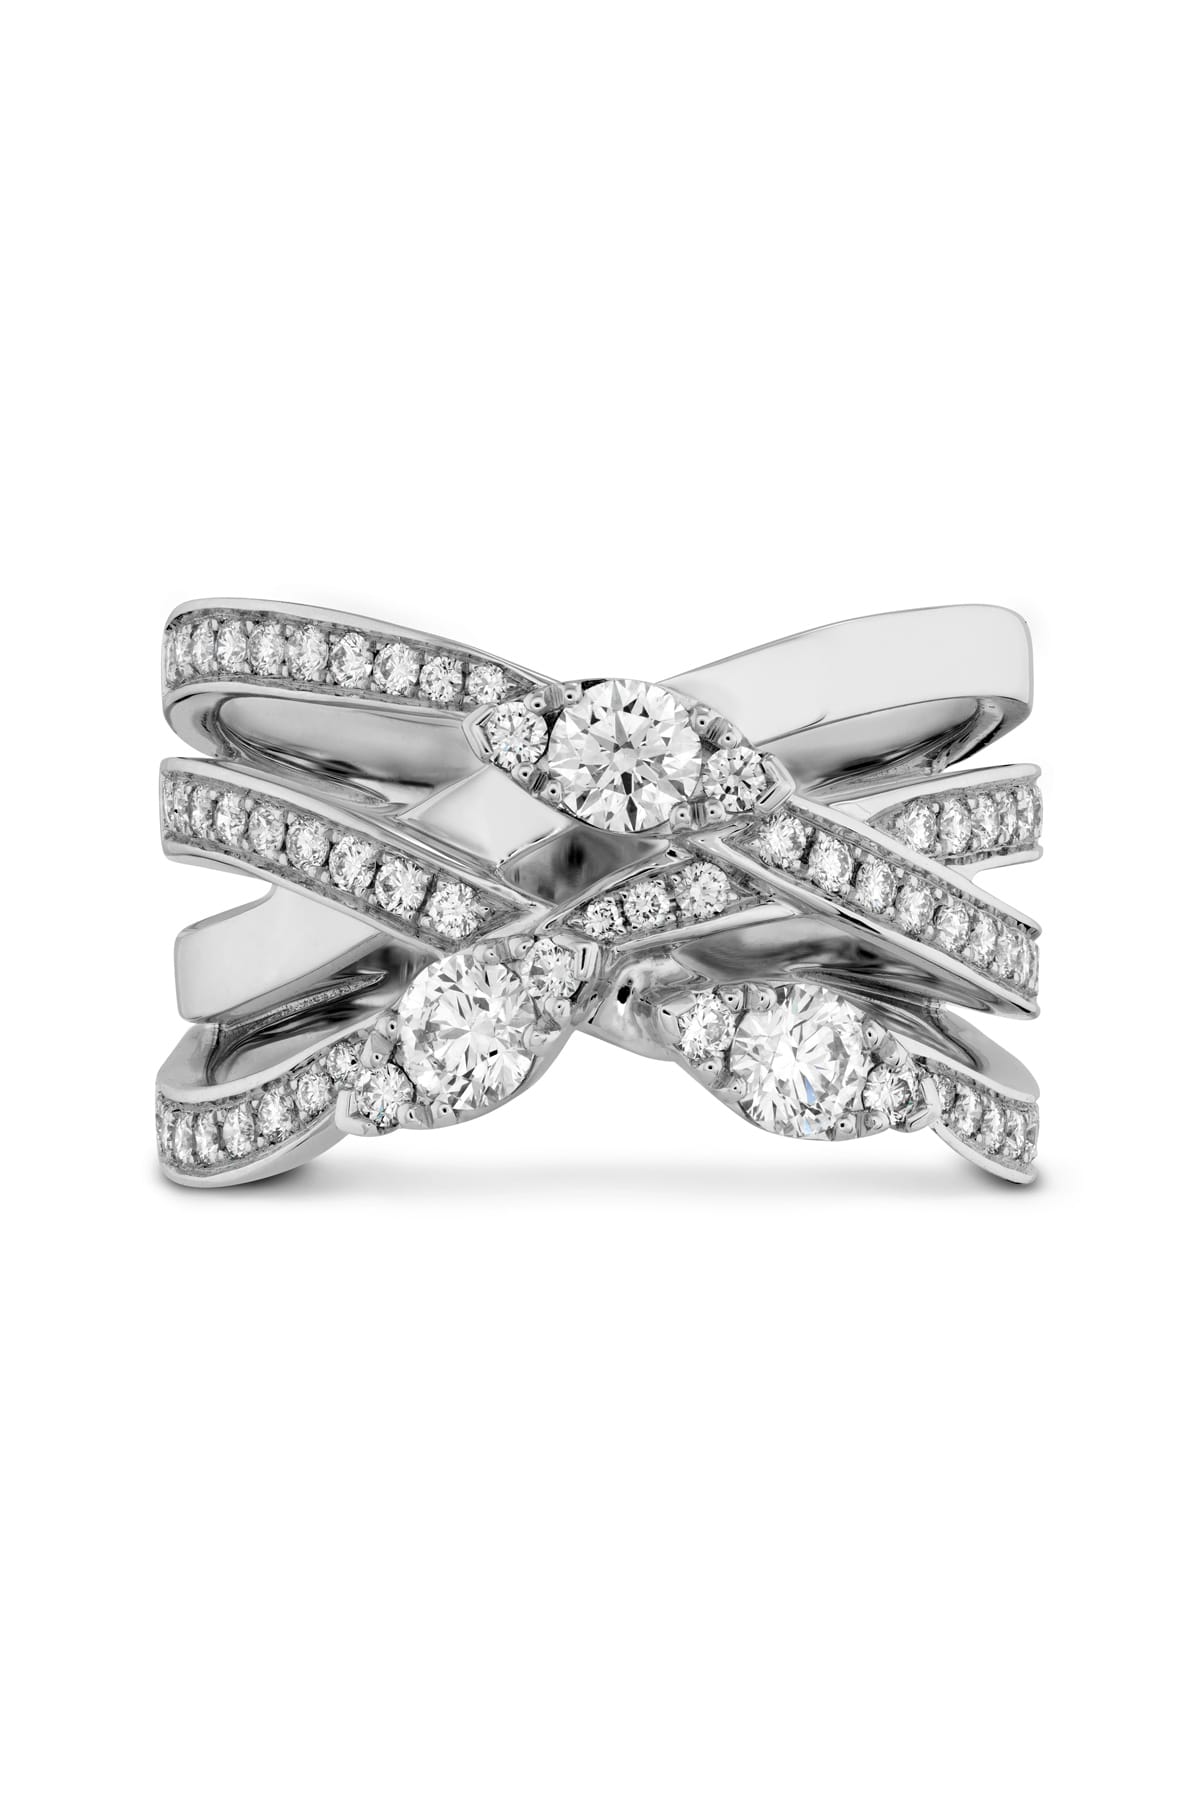 Aerial Diamond Right Hand Ring From Hearts On Fire available at LeGassick Diamonds and Jewellery Gold Coast, Australia.